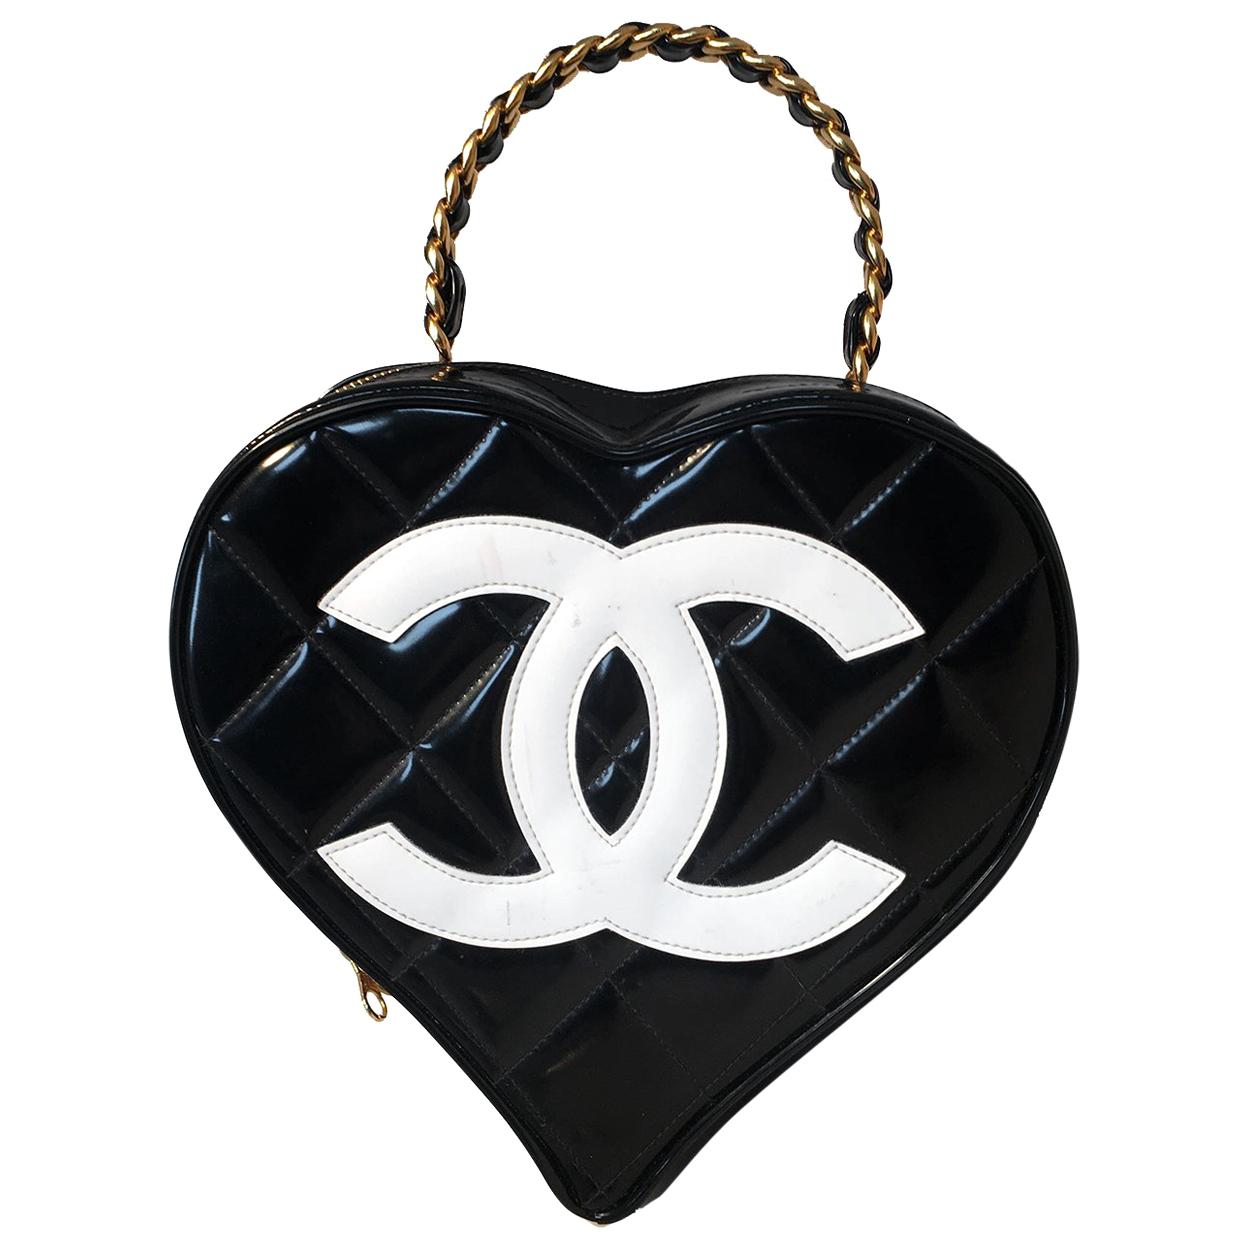 RARE Chanel Vintage Quilted Black and White Patent Leather Heart Bag